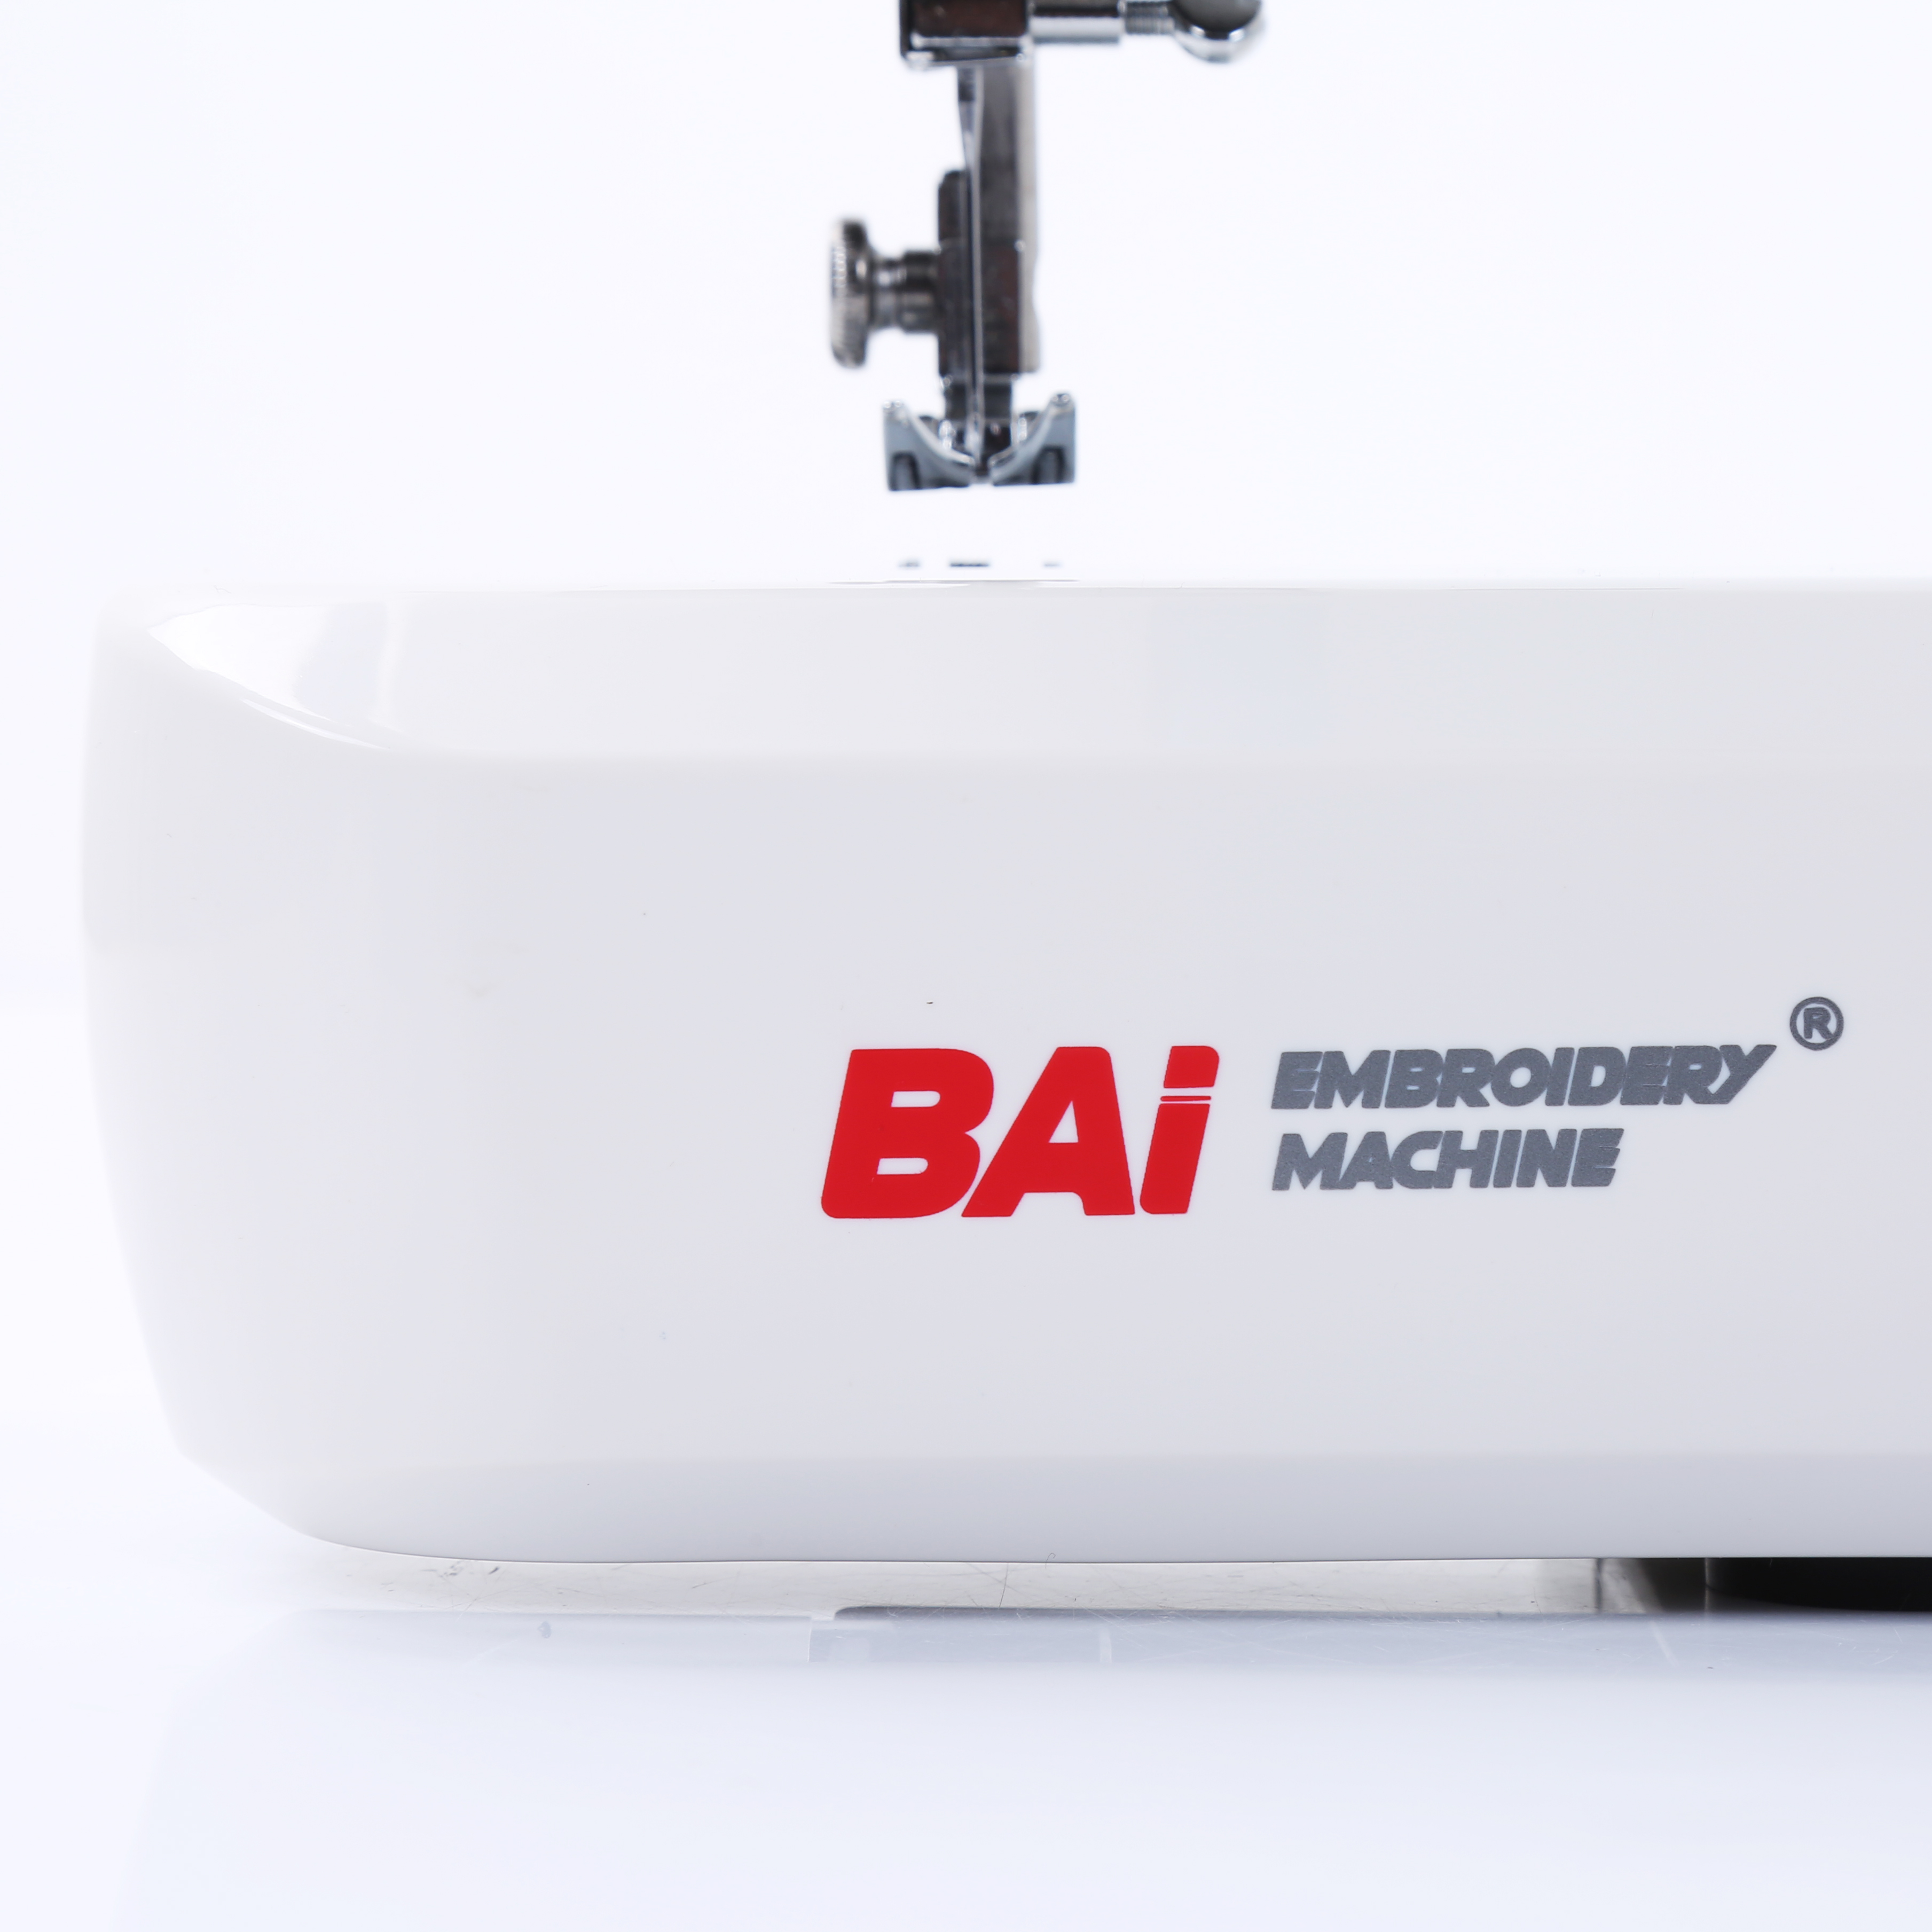 BAI Butterfly Ja2 2 Household Sewing Machine for Factory Acme Household Sewing Machine